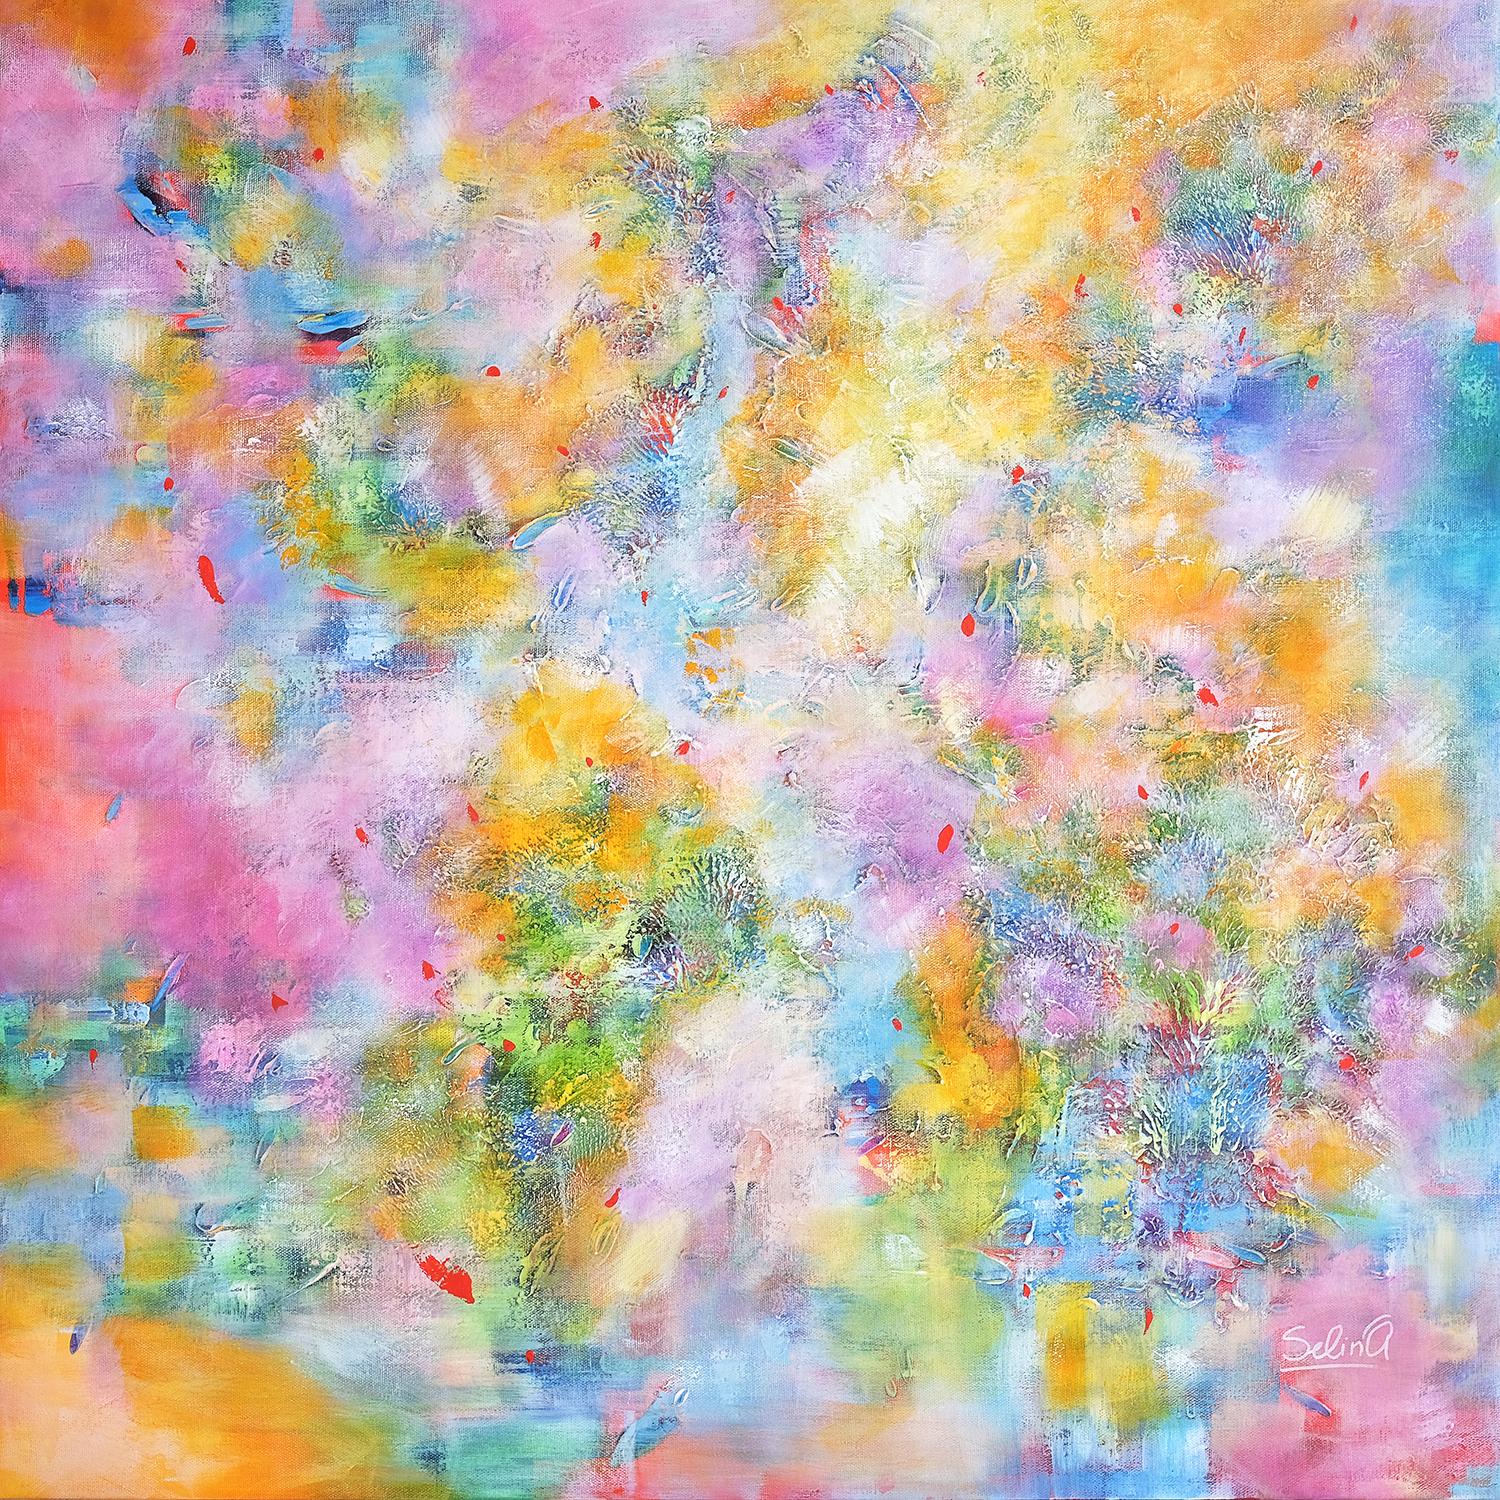 This artwork is about inner light, light of your heart, your way,when you feel that everything is possible.Colors here are calming, natural and well balanced. It's very fresh with spring vibes of awaking nature around us.
Bright colors bring bright